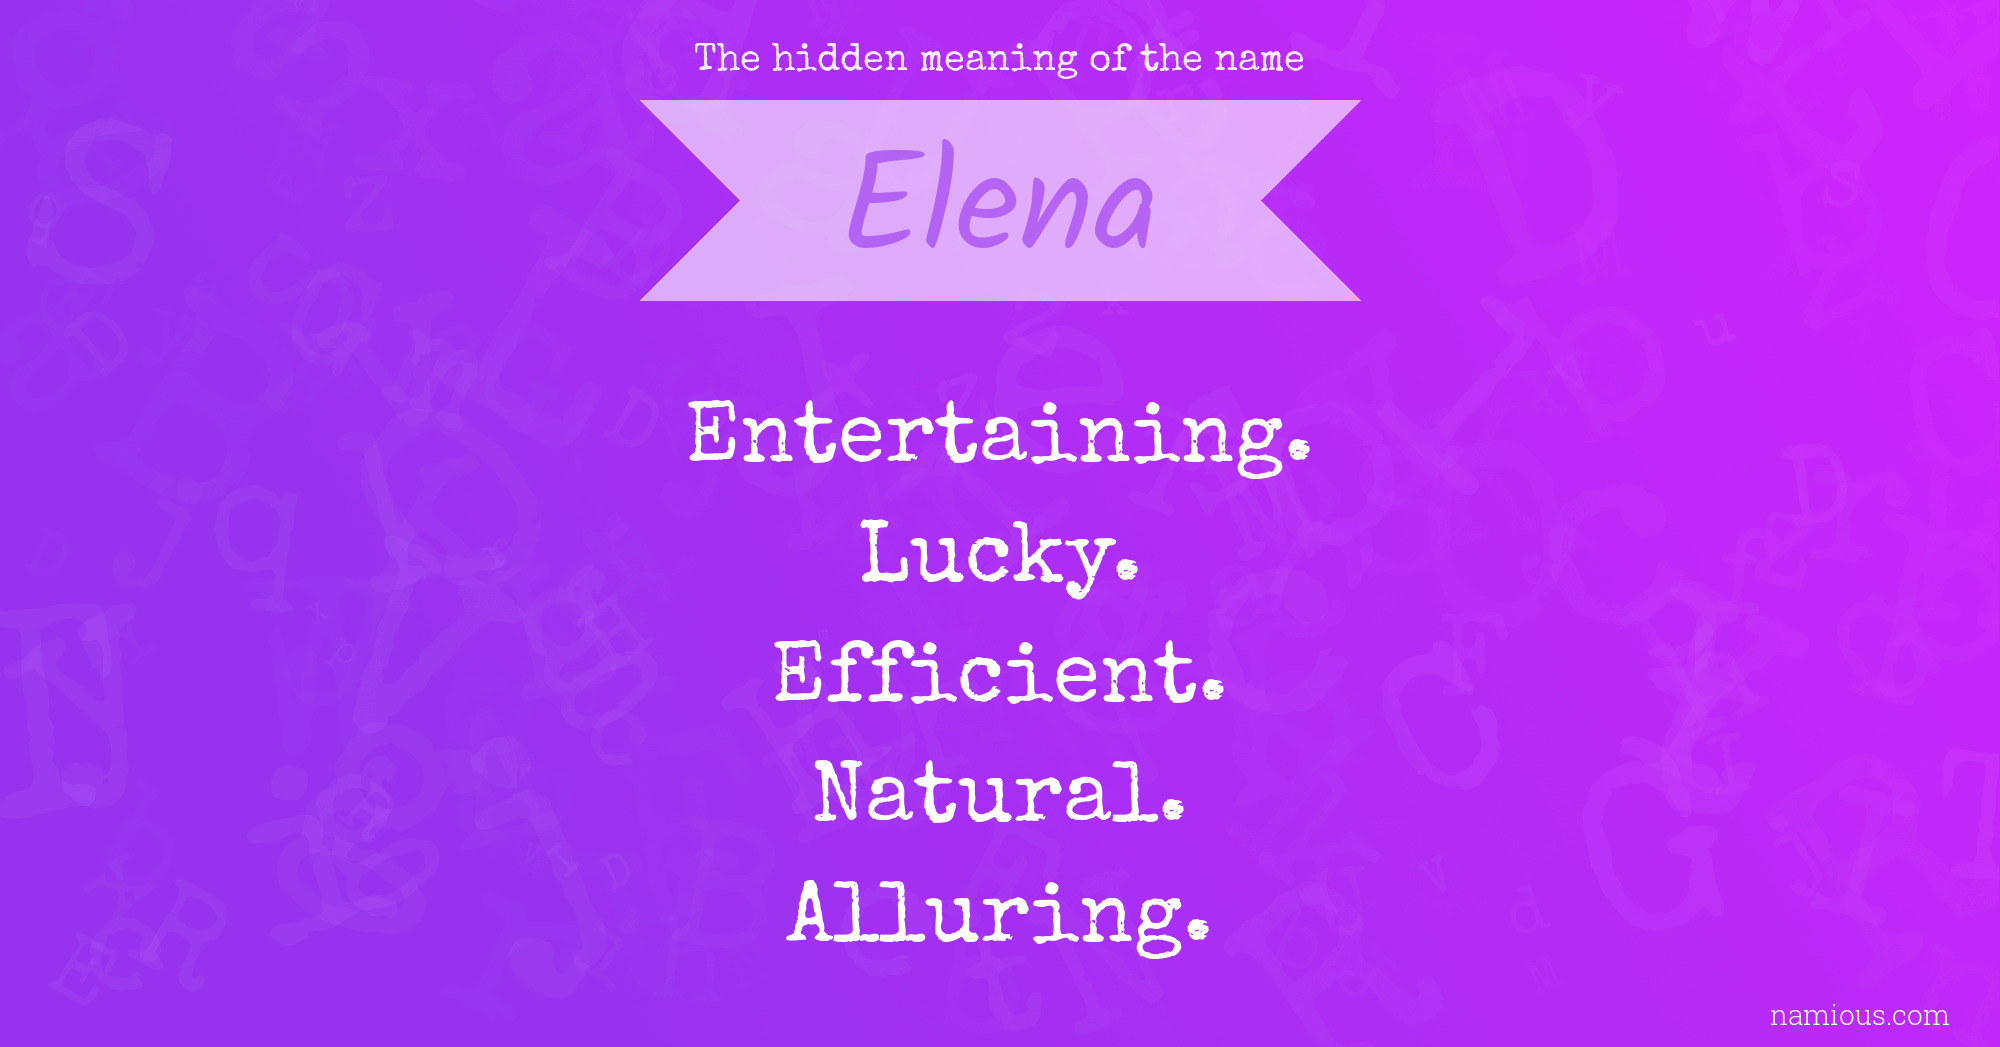 The hidden meaning of the name Elena